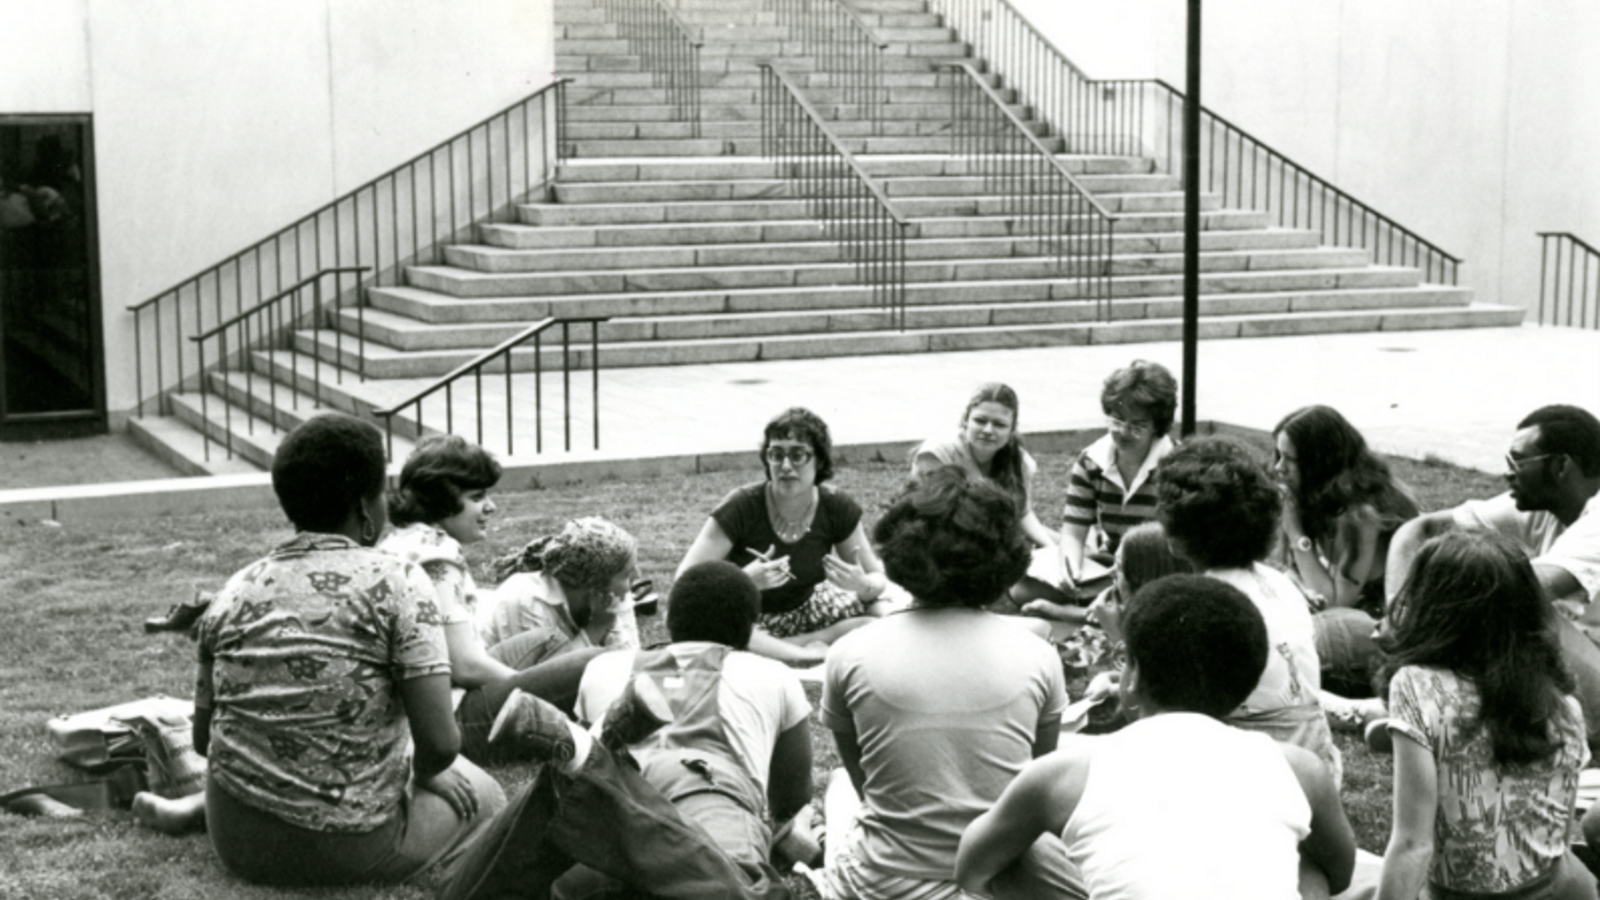 mage courtesy of Barnard Archives. This photograph from the Barnard College archives of an Environmental Science class (circa 1980) represents the type of open dialogue and active, intent listening that is so vital to the relating across difference that this resource centers.